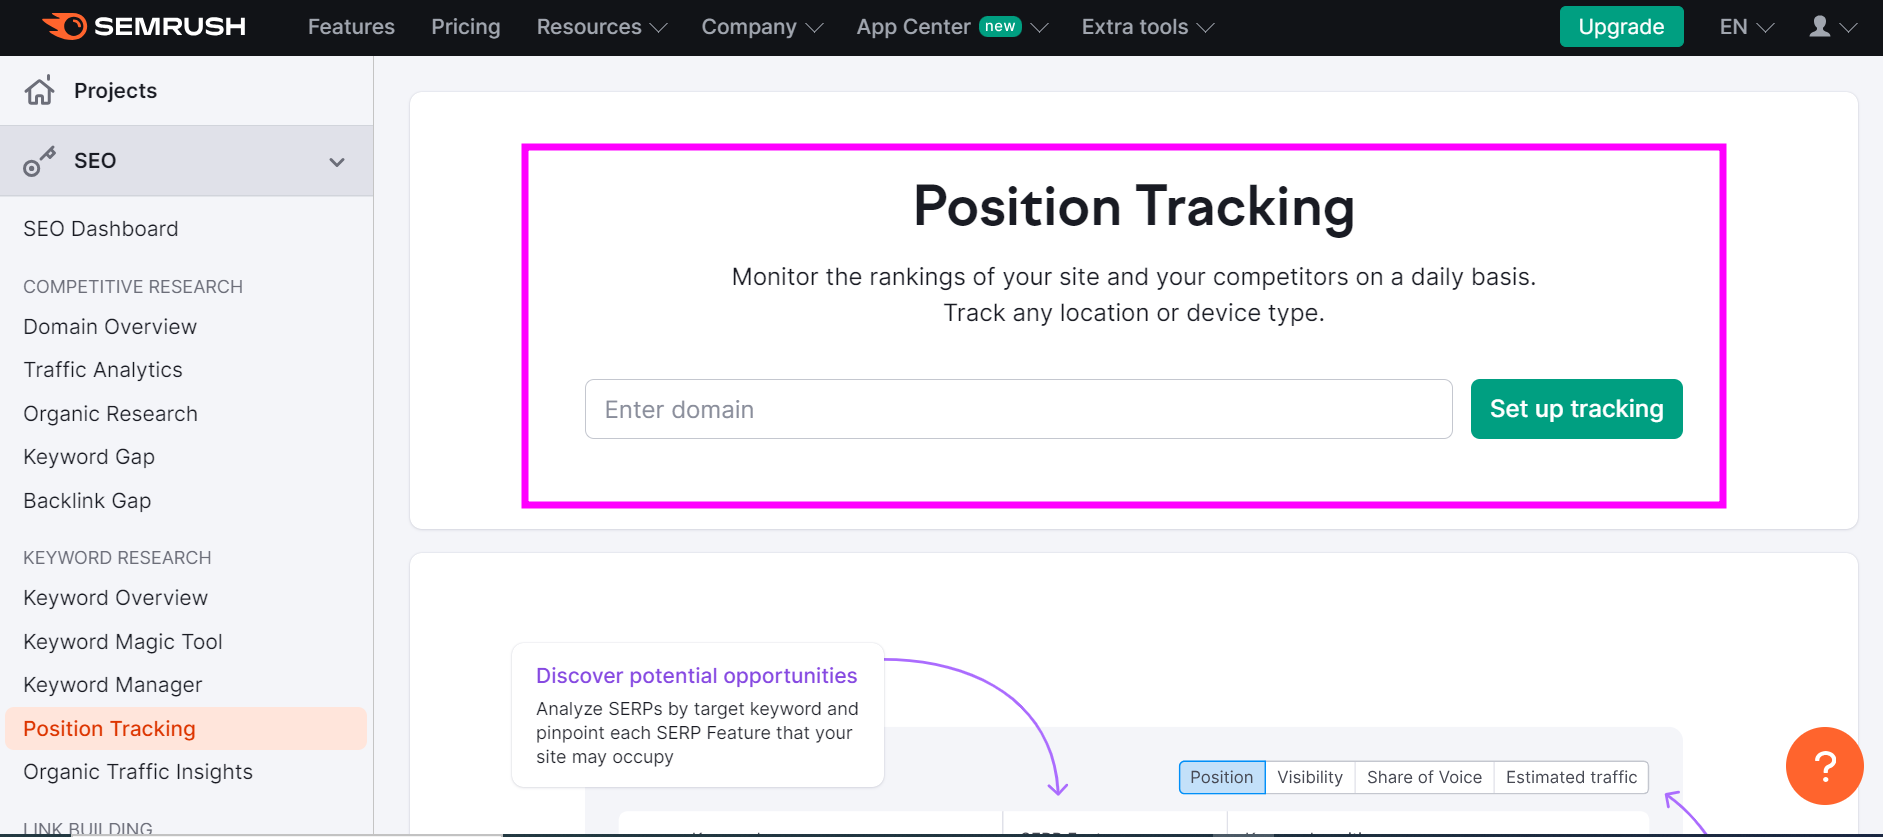 Position tracking